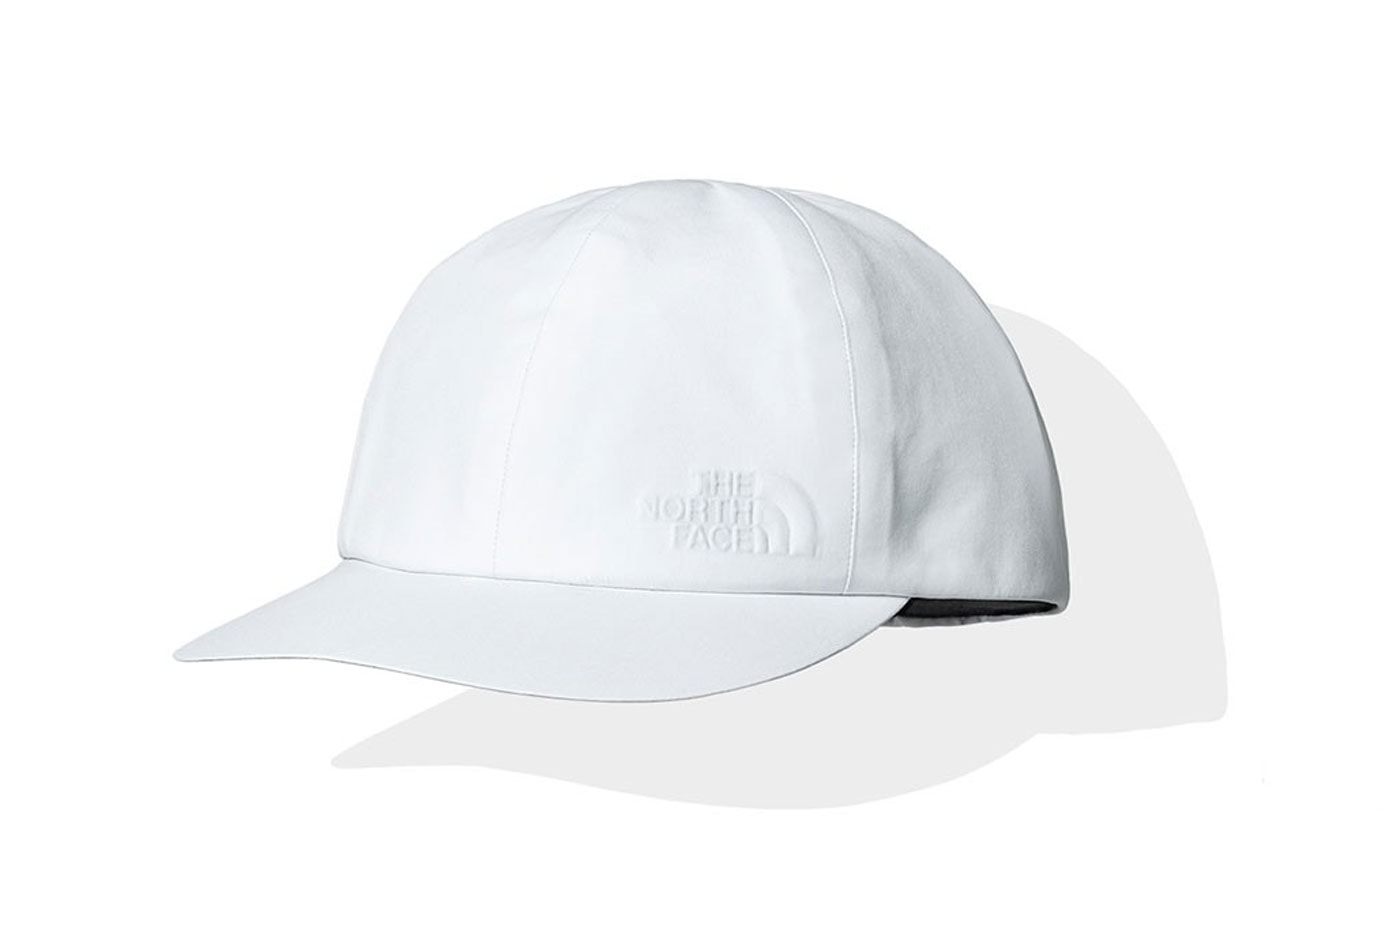 The North Face Urban exploration undyed collection no dye eco-friendly gore tex jackets hats caps do more with less release info